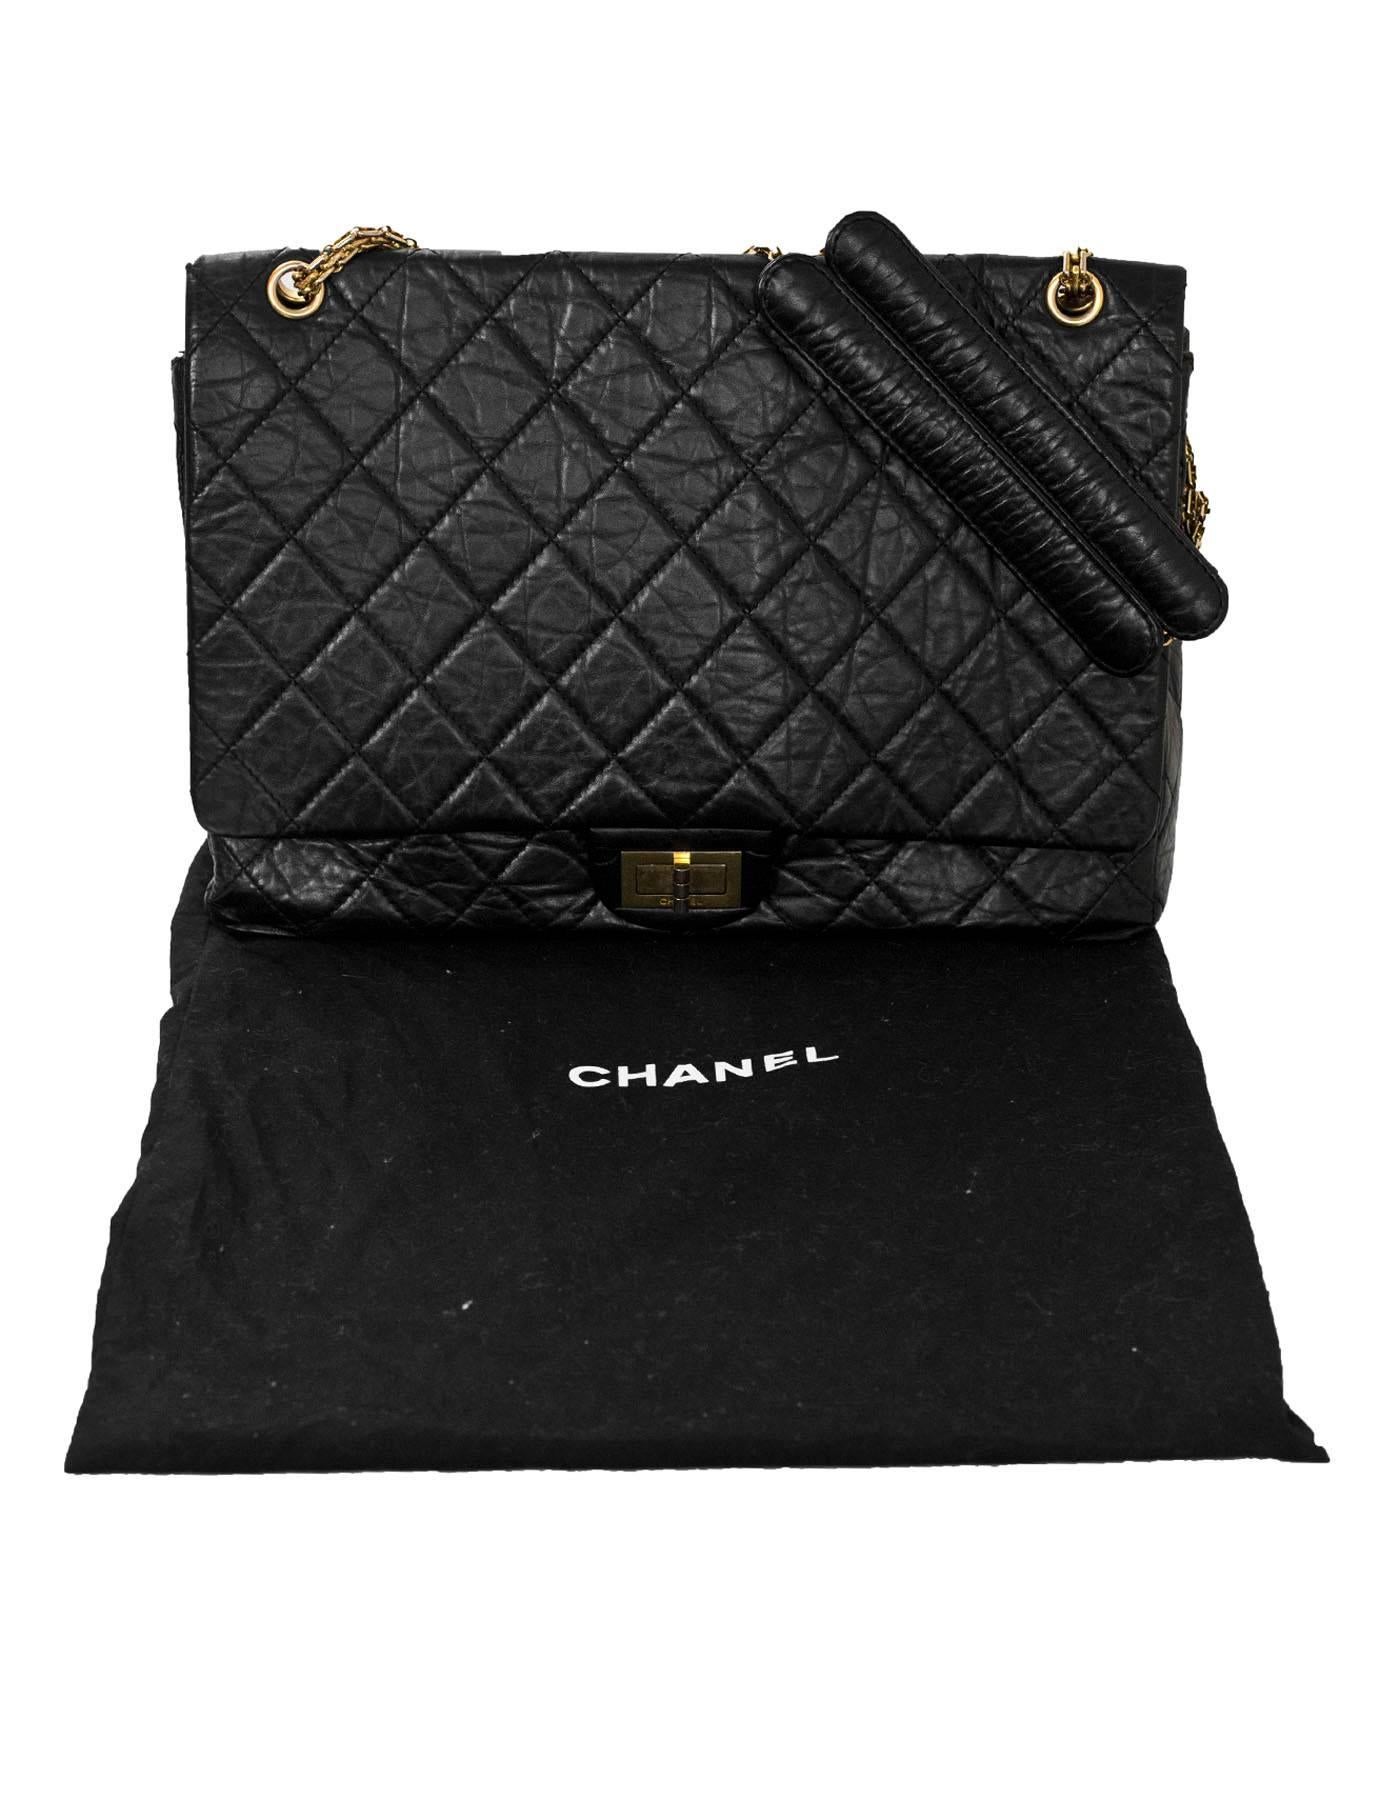 Chanel Black Distressed Calfskin Leather XL Reissue 2.55 Quilted Flap Bag 6